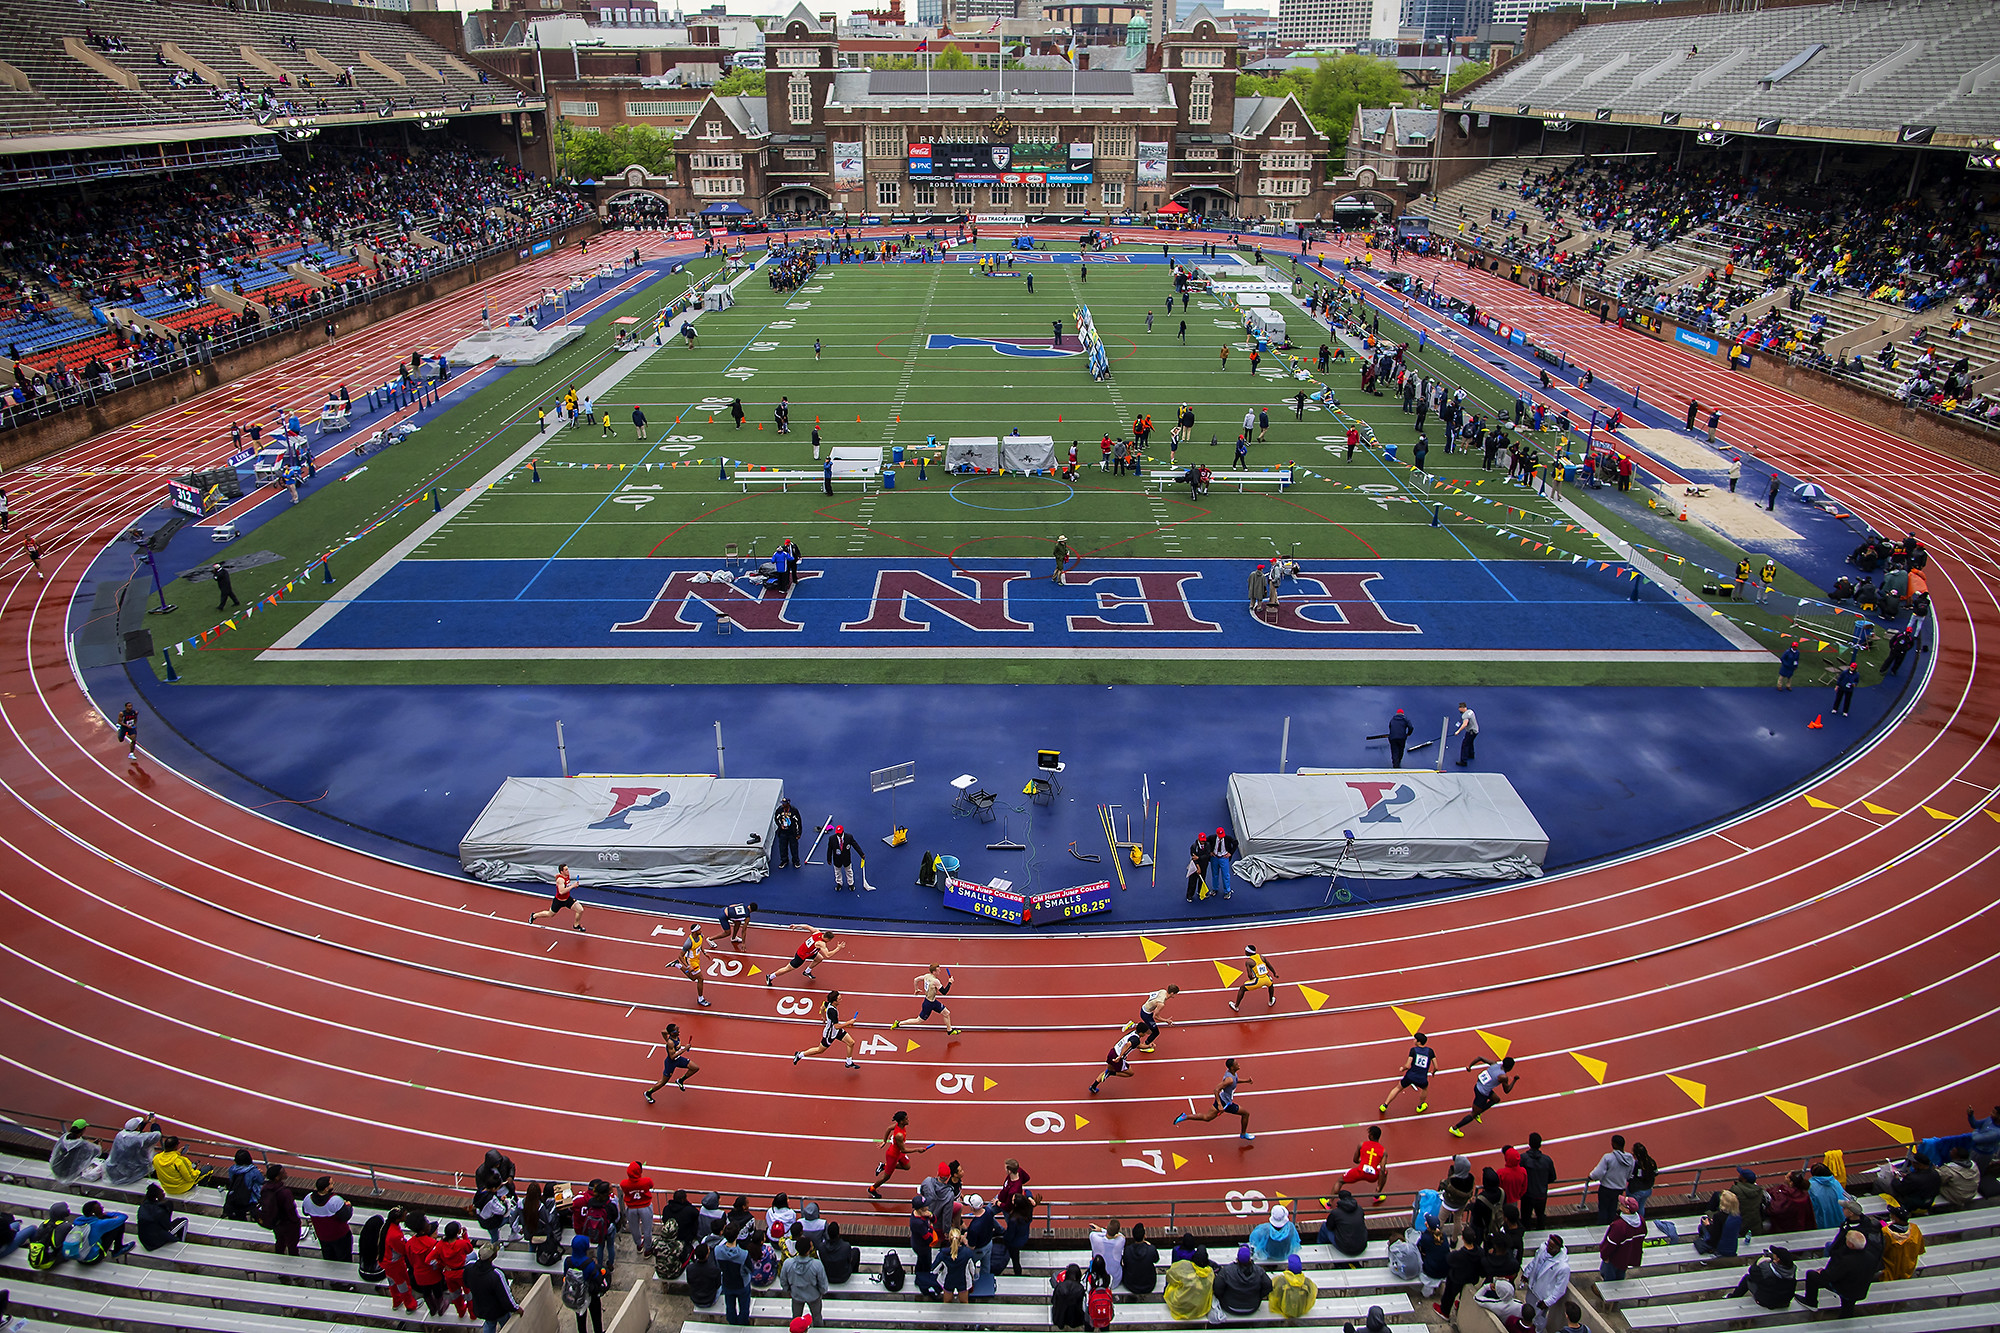 Penn Relays is an annual track and field event that takes place at the University of Pennsylvania's Franklin Field stadium in Philadelphia, Pennsylvania.